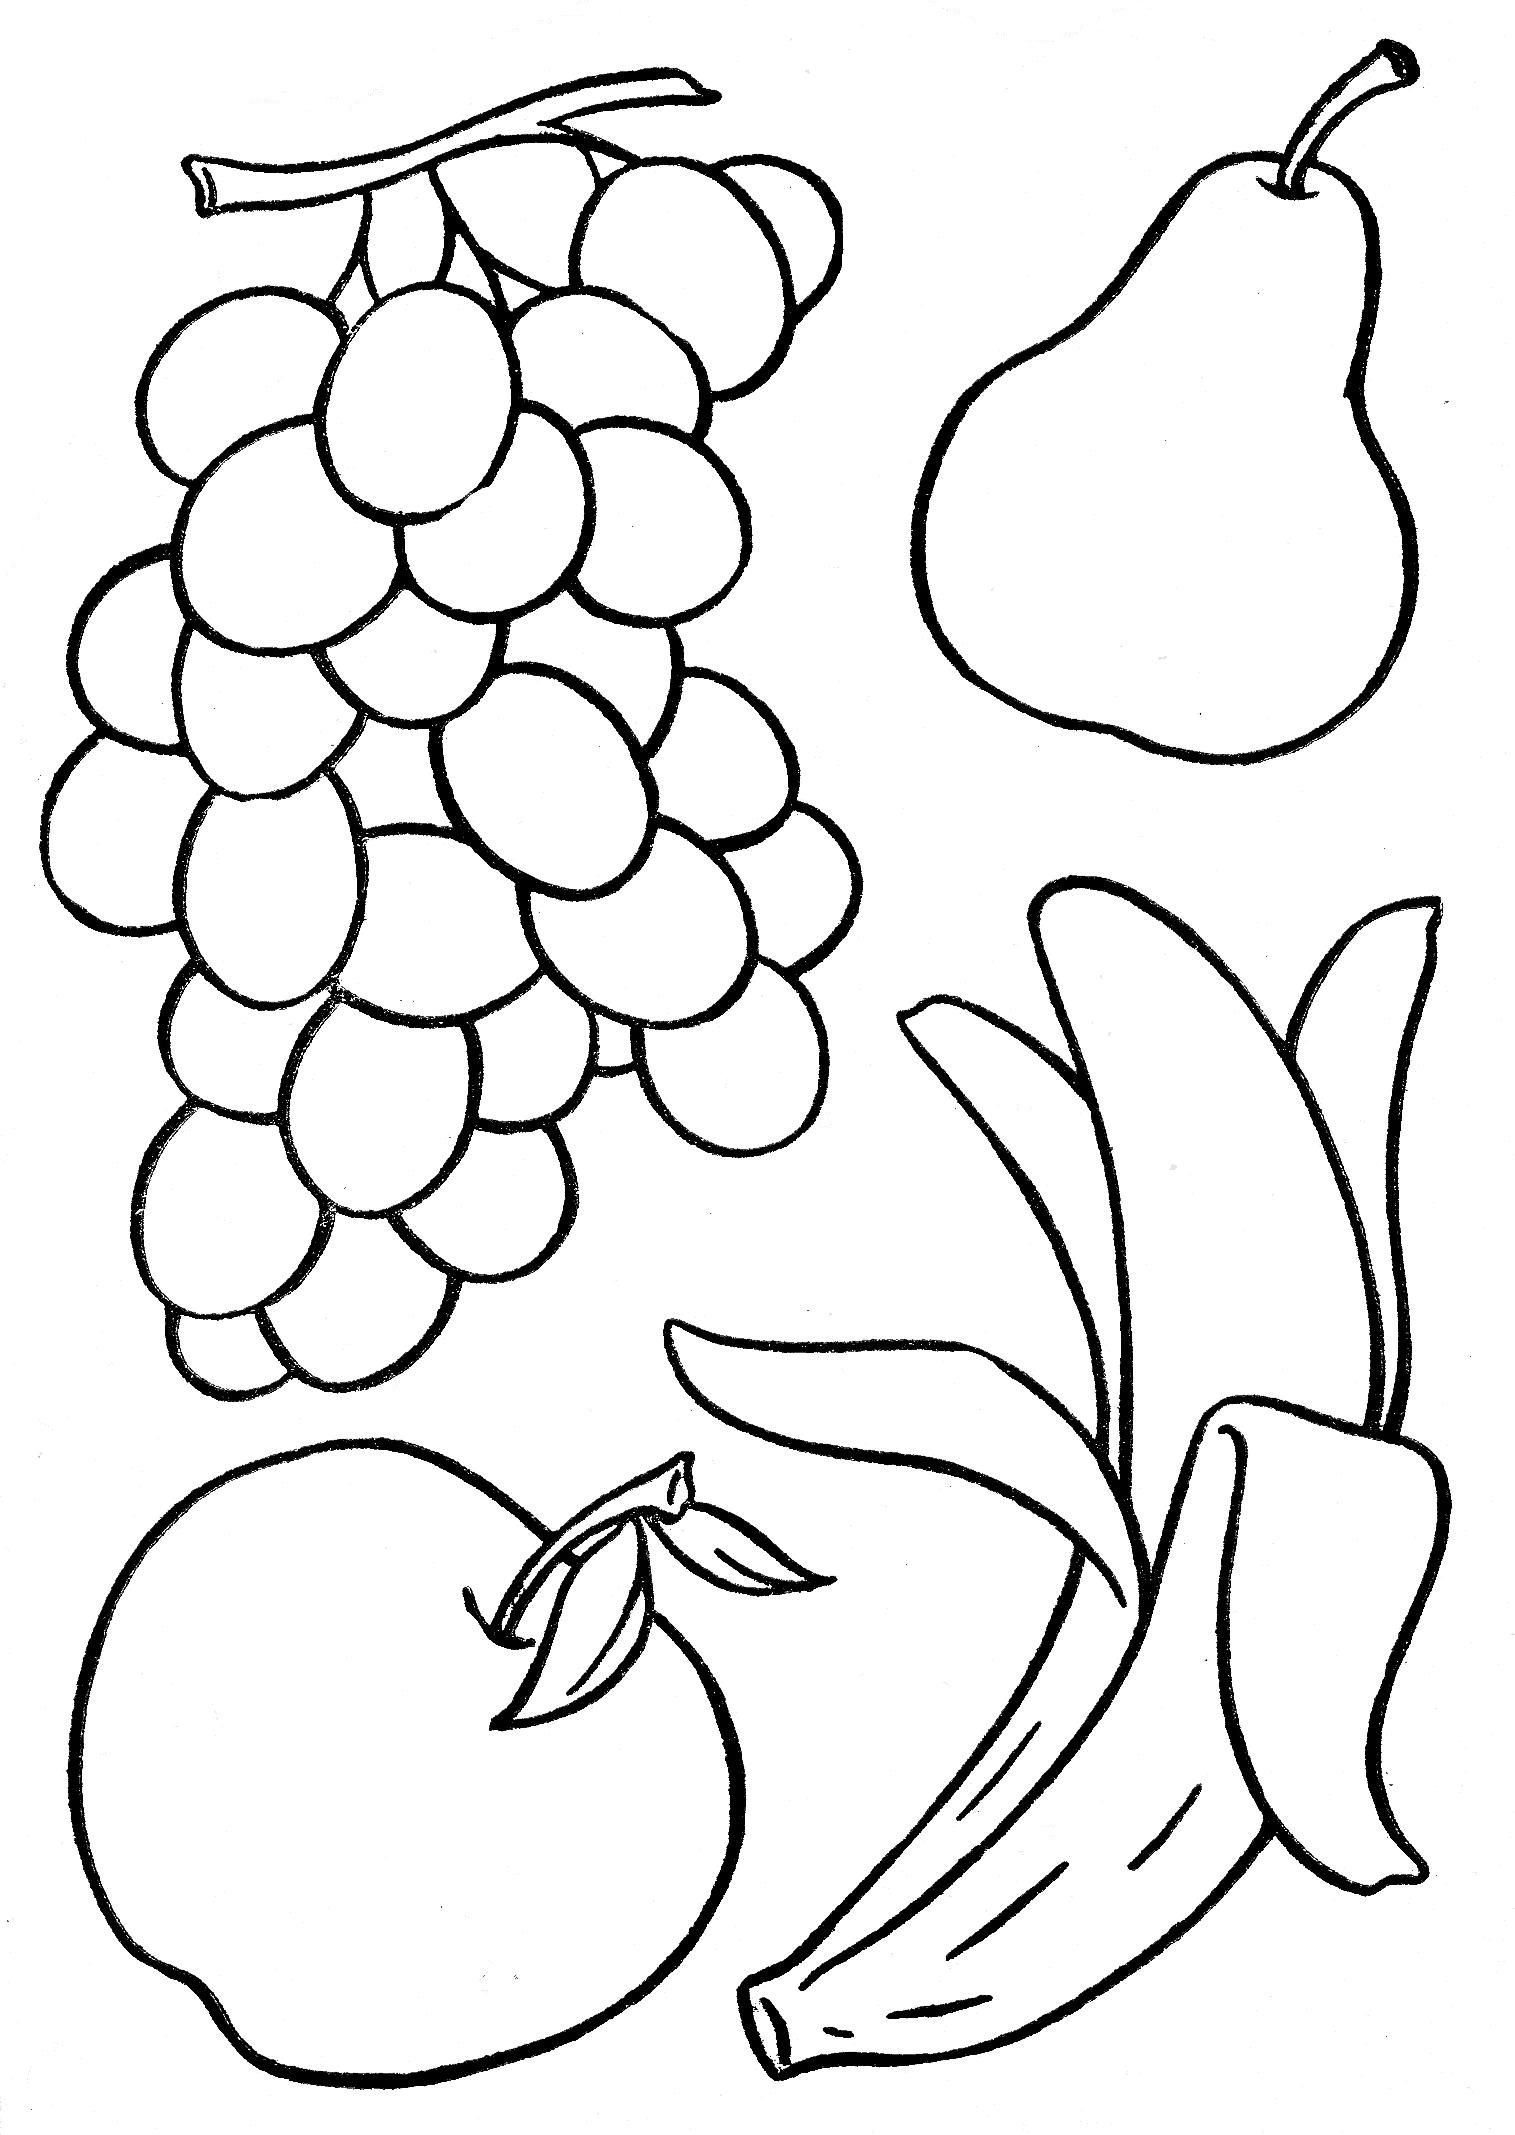 Color Orange Coloring Pages Nice Fruit Pictures To Color Album Archive Bible School Coloring